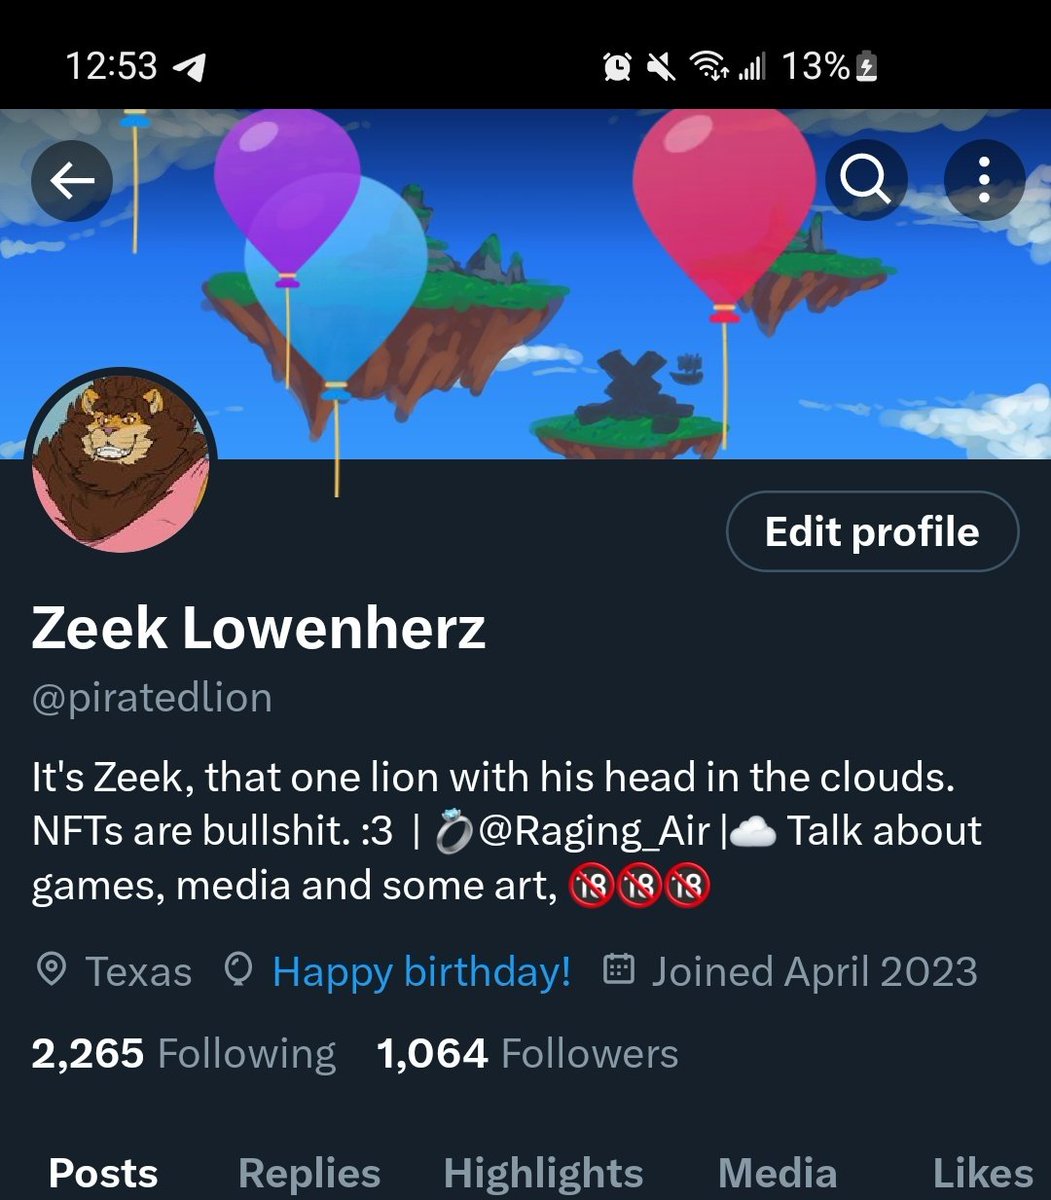 With age comes experience, and I keep leveling up! 🍖🦁🍻